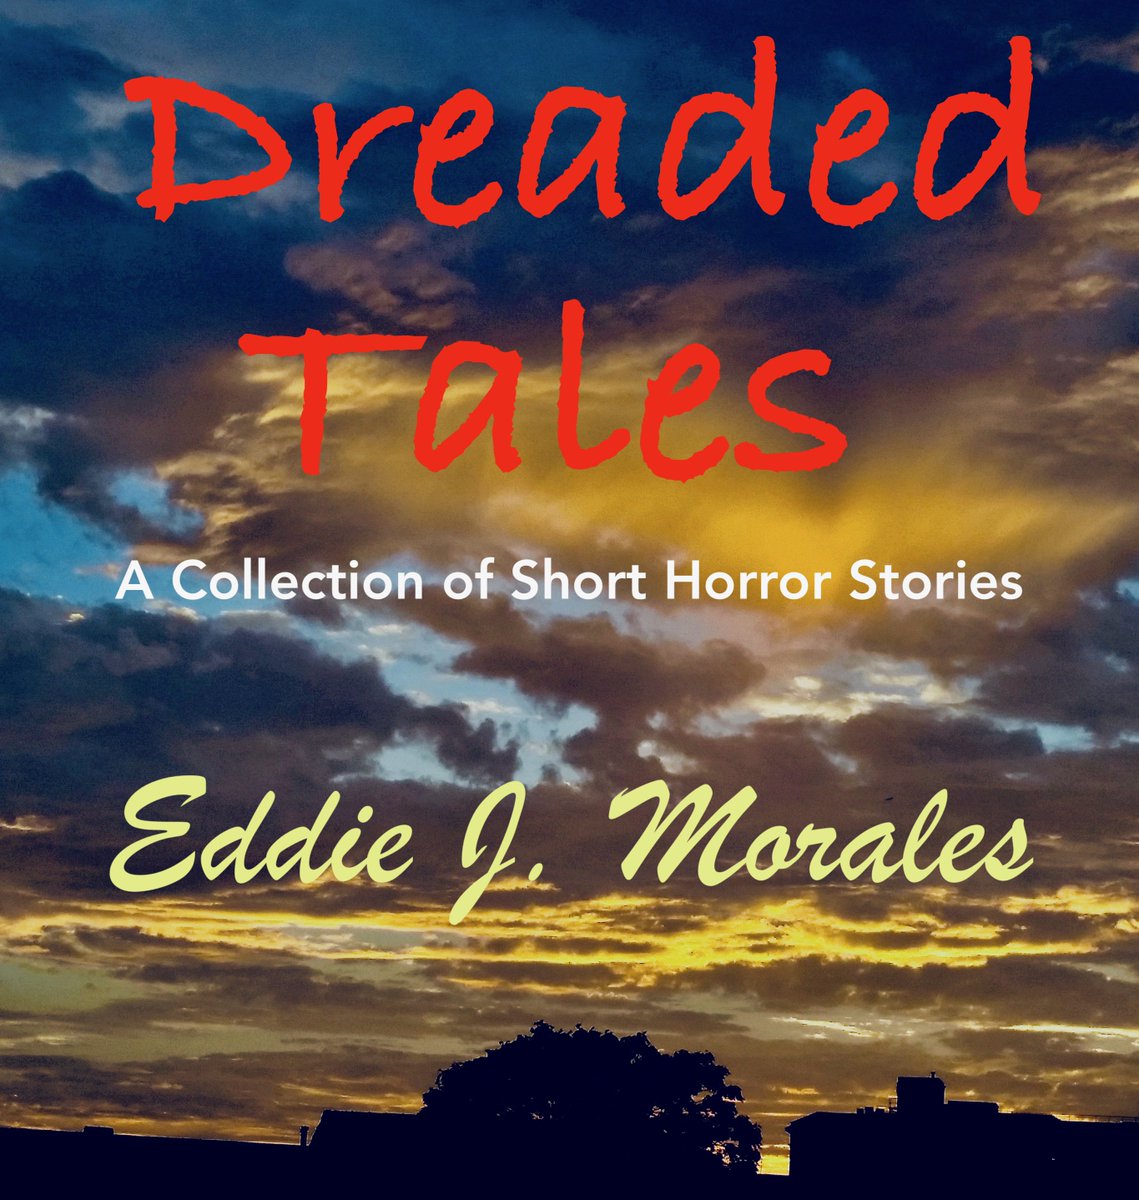 The relaunch of my 13 short #horror stories book will be coming soon Spring 2019 under the name of 'Dreaded Tales'. Same stories with added content. First draft of the #covereveal is below.  #IARTG #authorlife #shortstories #bookrelease #zombies #supernaturaI #paranormal & more.